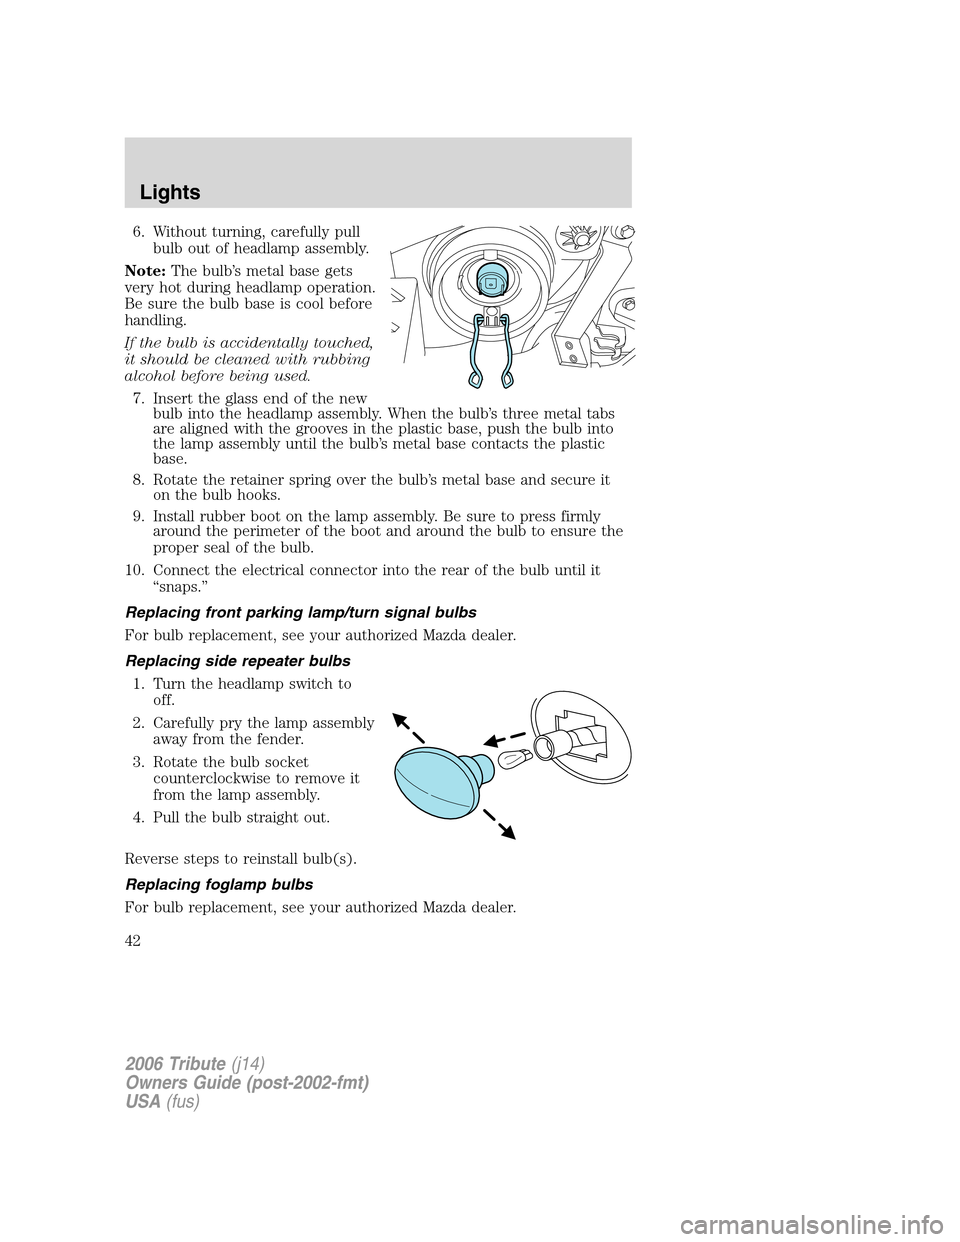 MAZDA MODEL TRIBUTE 2006   (in English) Service Manual 6. Without turning, carefully pull
bulb out of headlamp assembly.
Note:The bulb’s metal base gets
very hot during headlamp operation.
Be sure the bulb base is cool before
handling.
If the bulb is ac